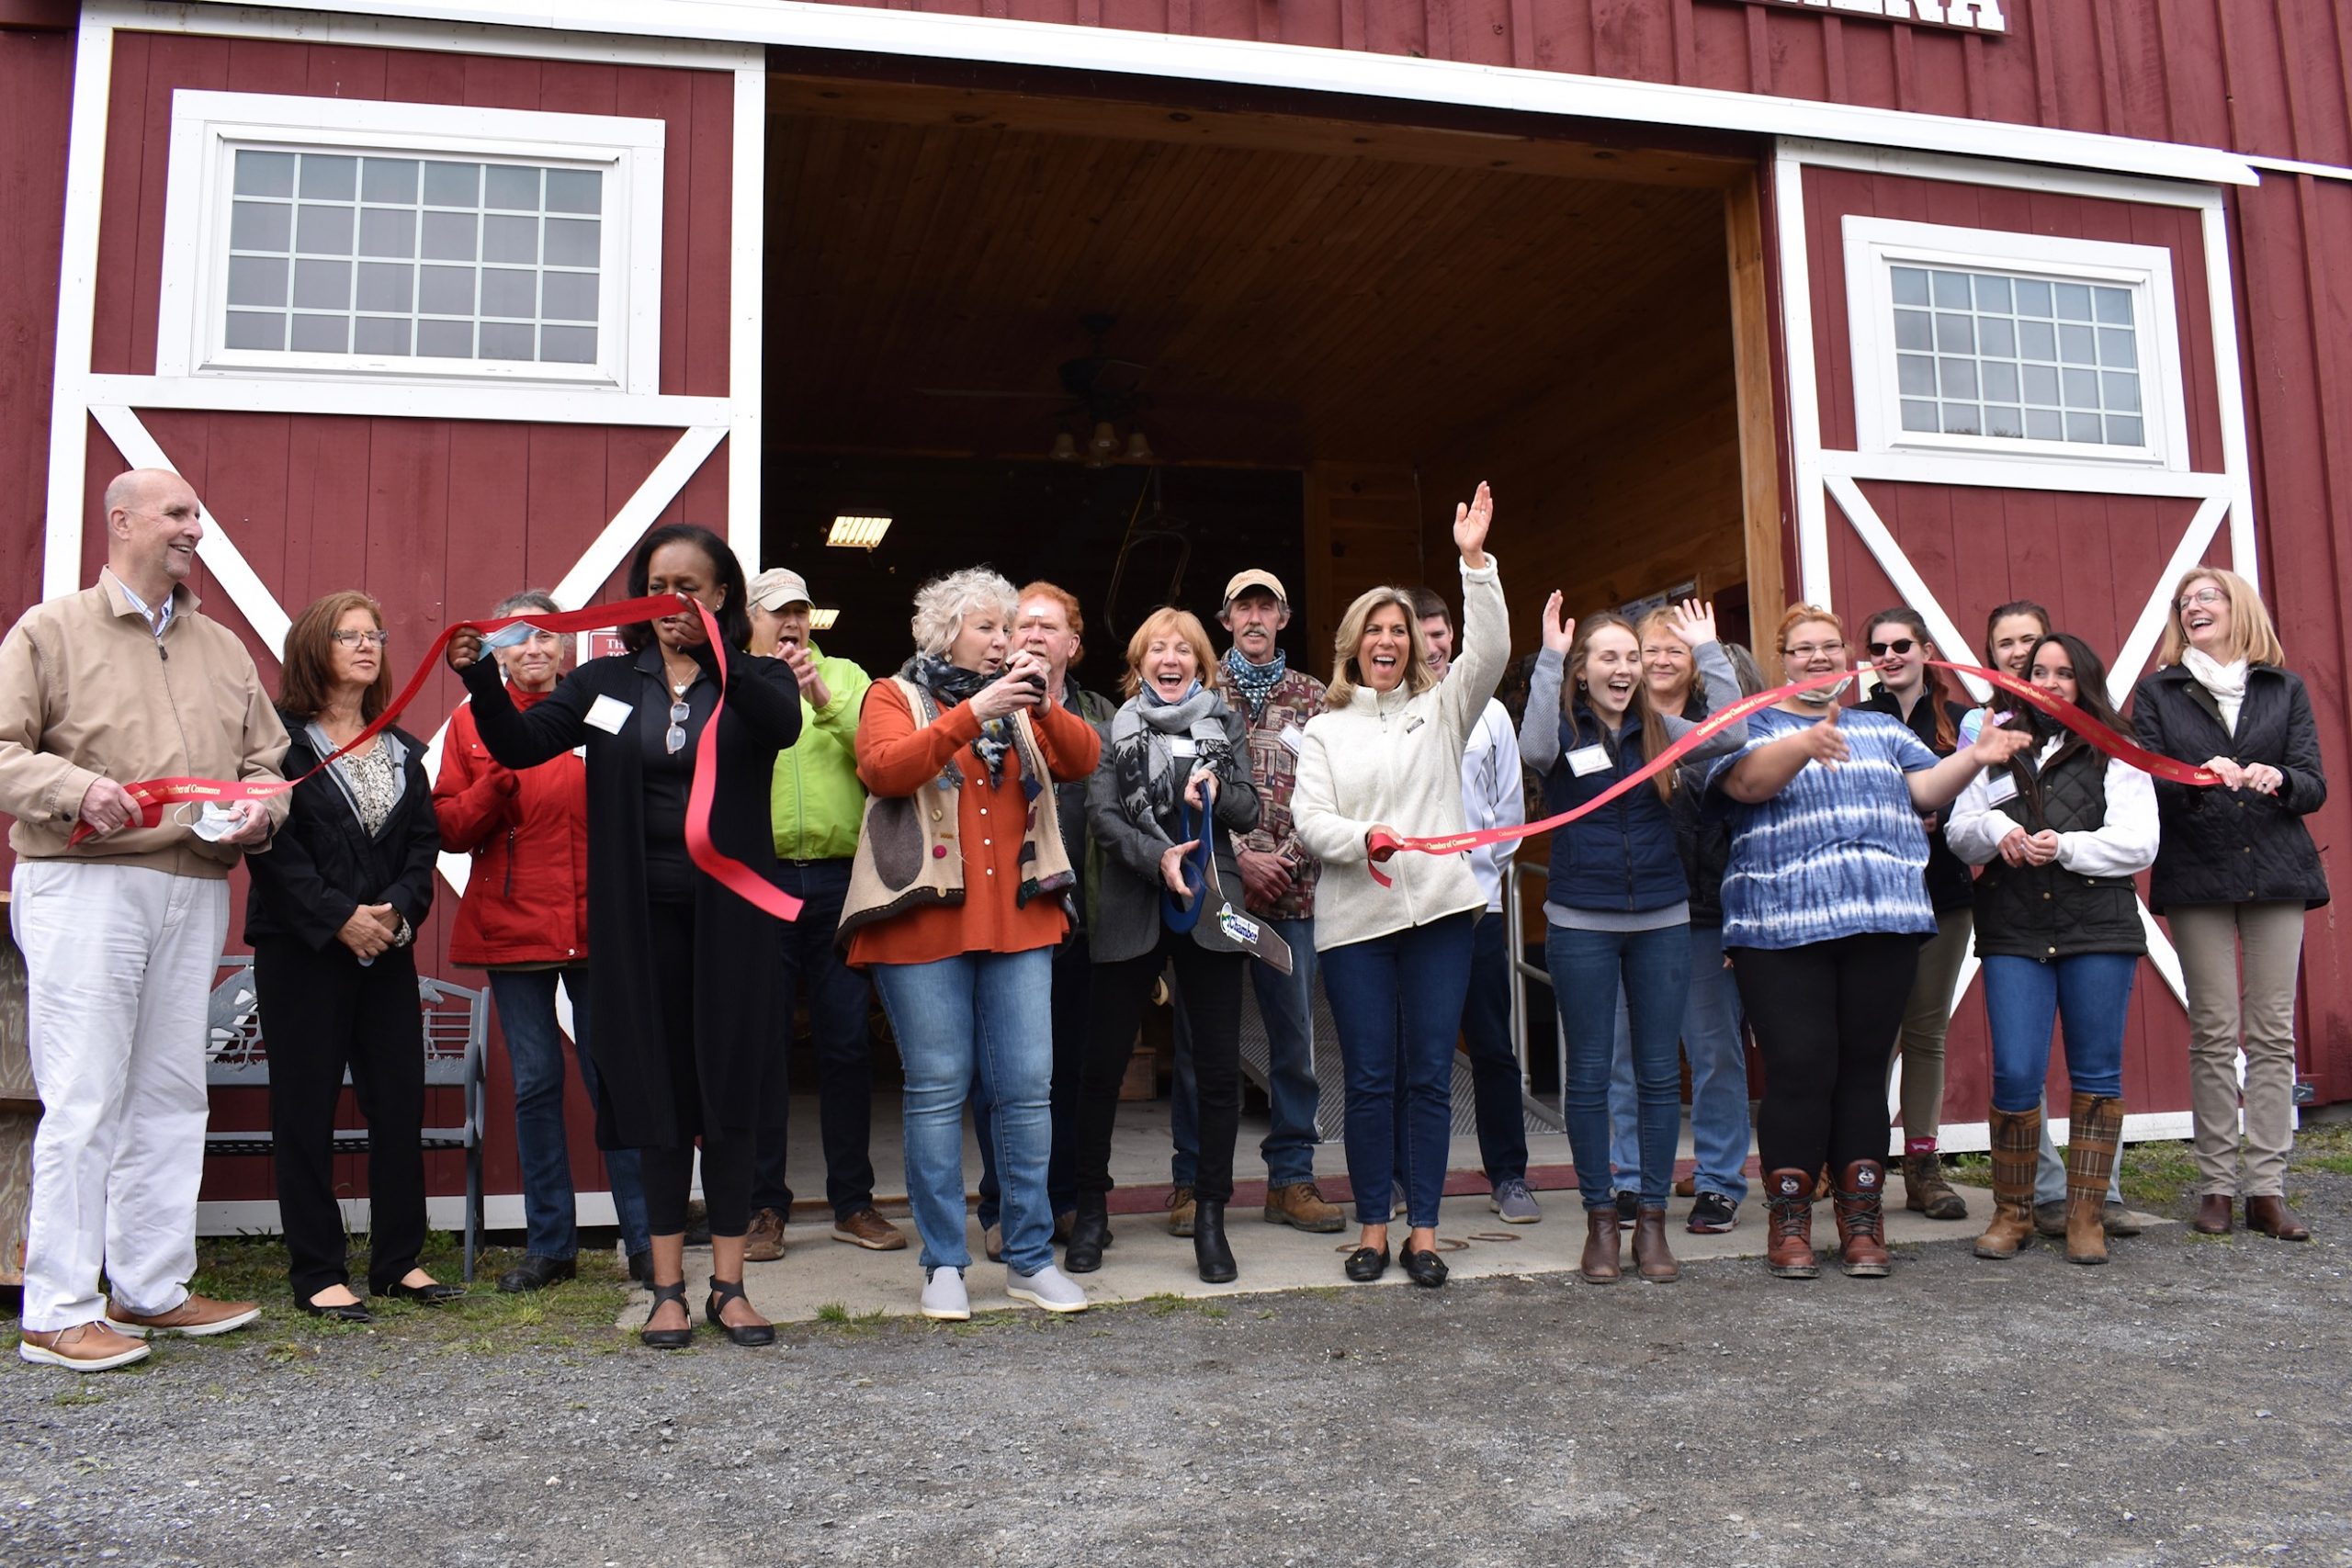 A group of people smiling and celebrating outside a red barn in the ribbon cutting ceremony at High & Mighty